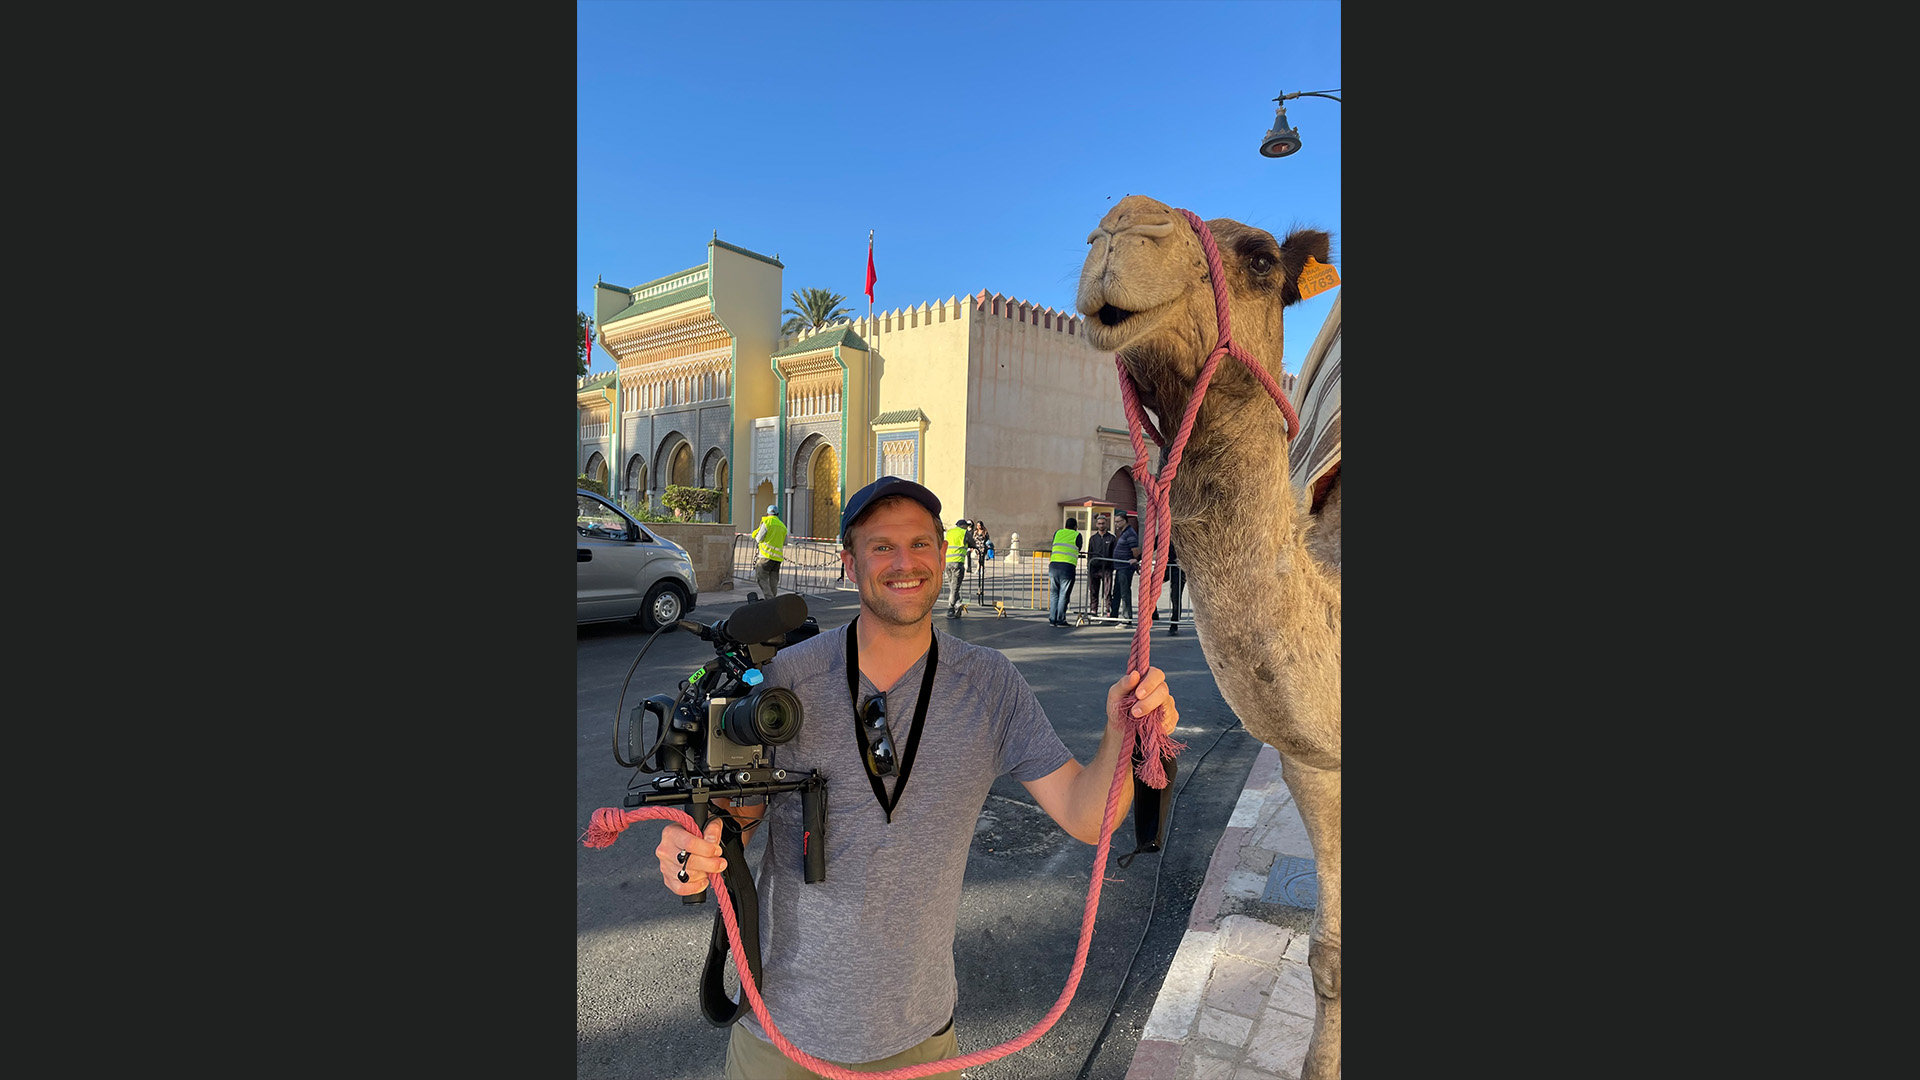 Ian Bucknole with a camel on location in Morocco.